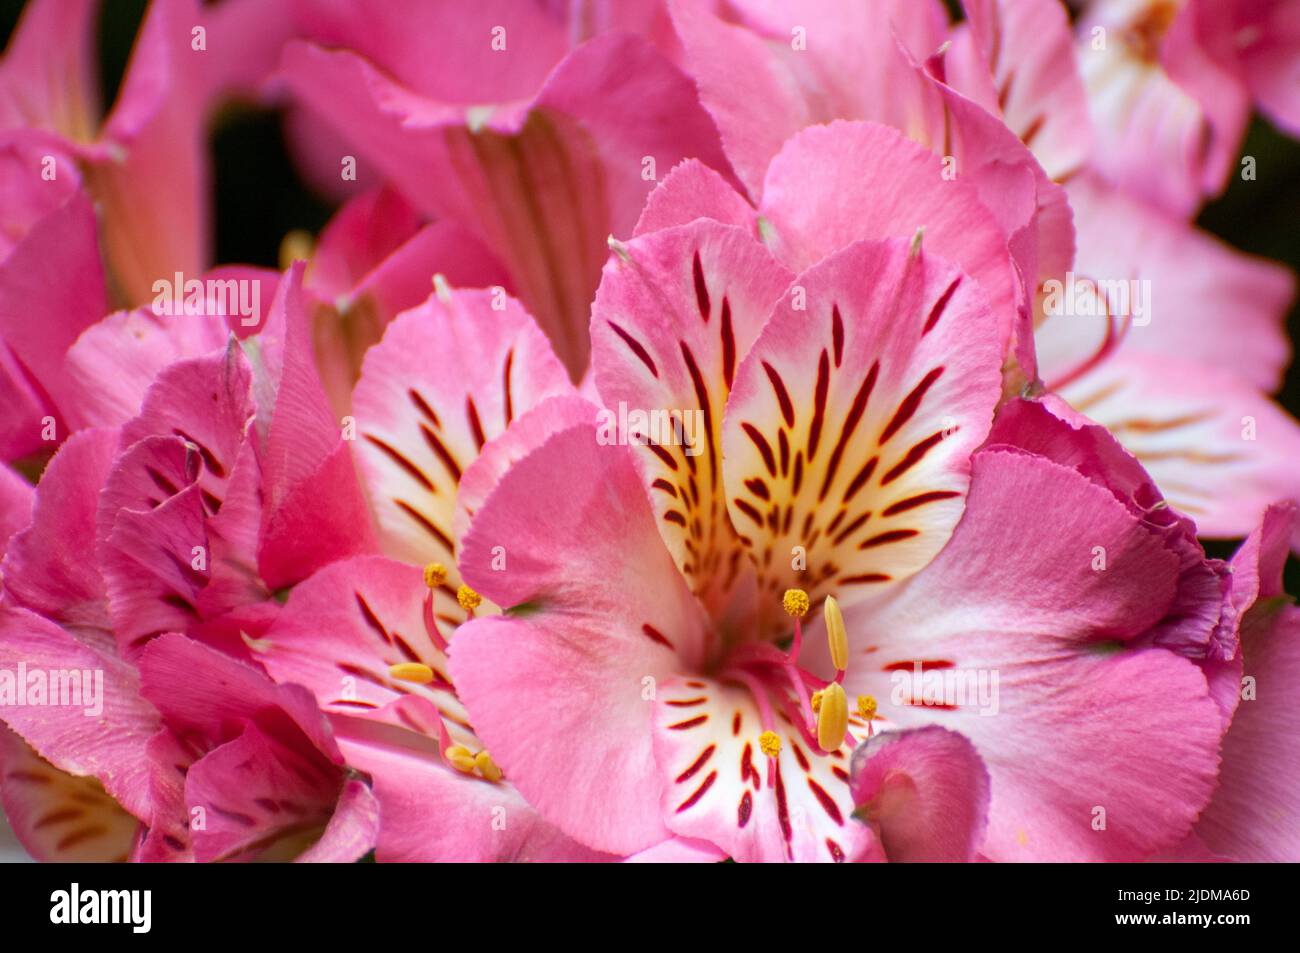 Pink Alstroemeria Cultivar commonly called the Peruvian lily or lily of the Incas, is a genus of flowering plants in the family Alstroemeriaceae. They Stock Photo